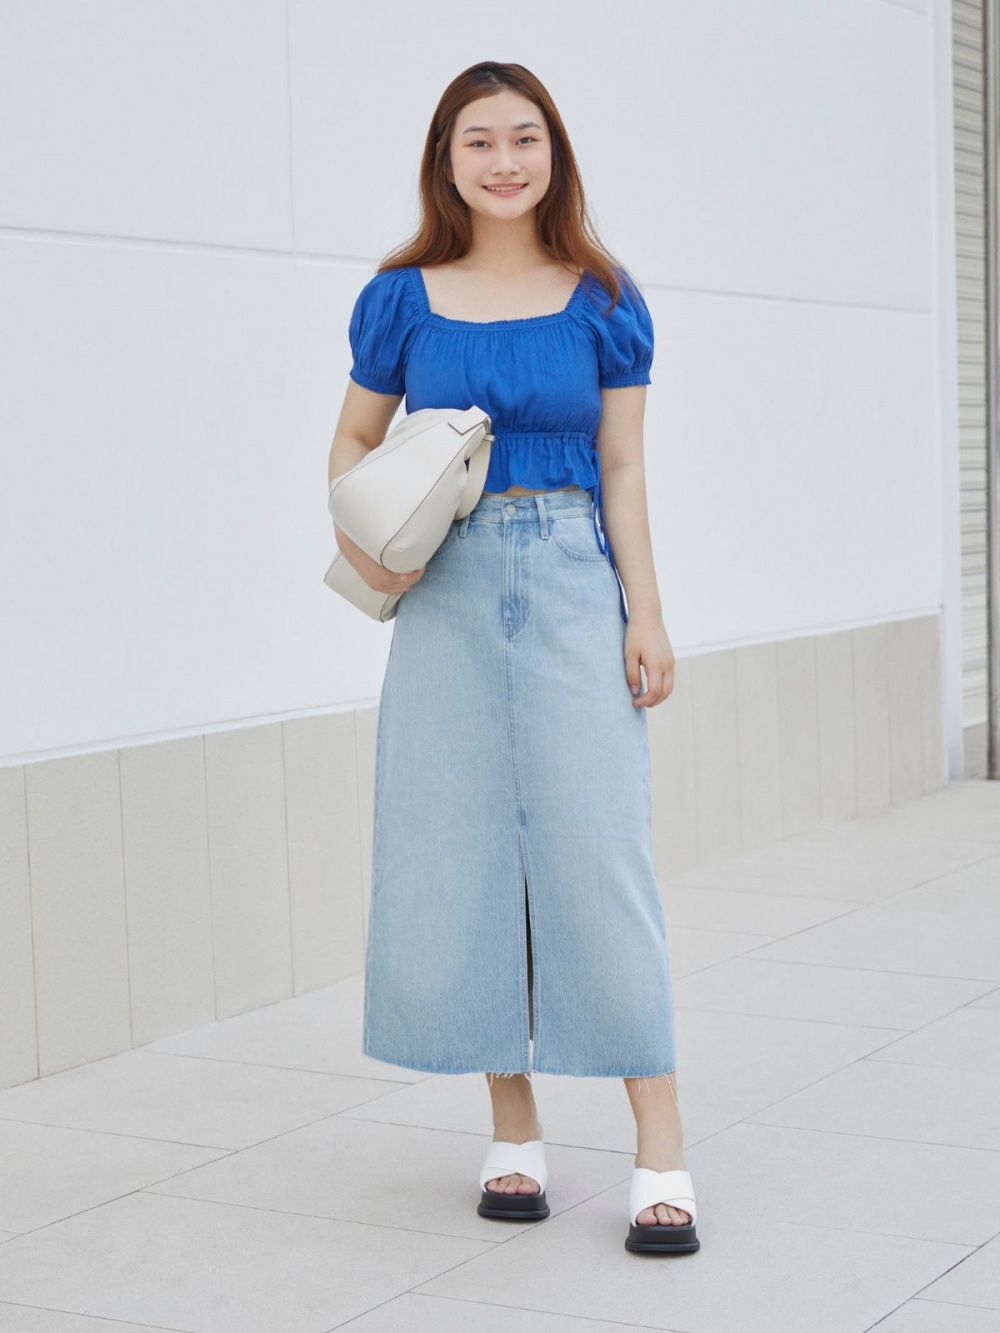 Check styling ideas for「Smooth Cotton Relaxed Crew Neck Sweater、Denim Long  Skirt」